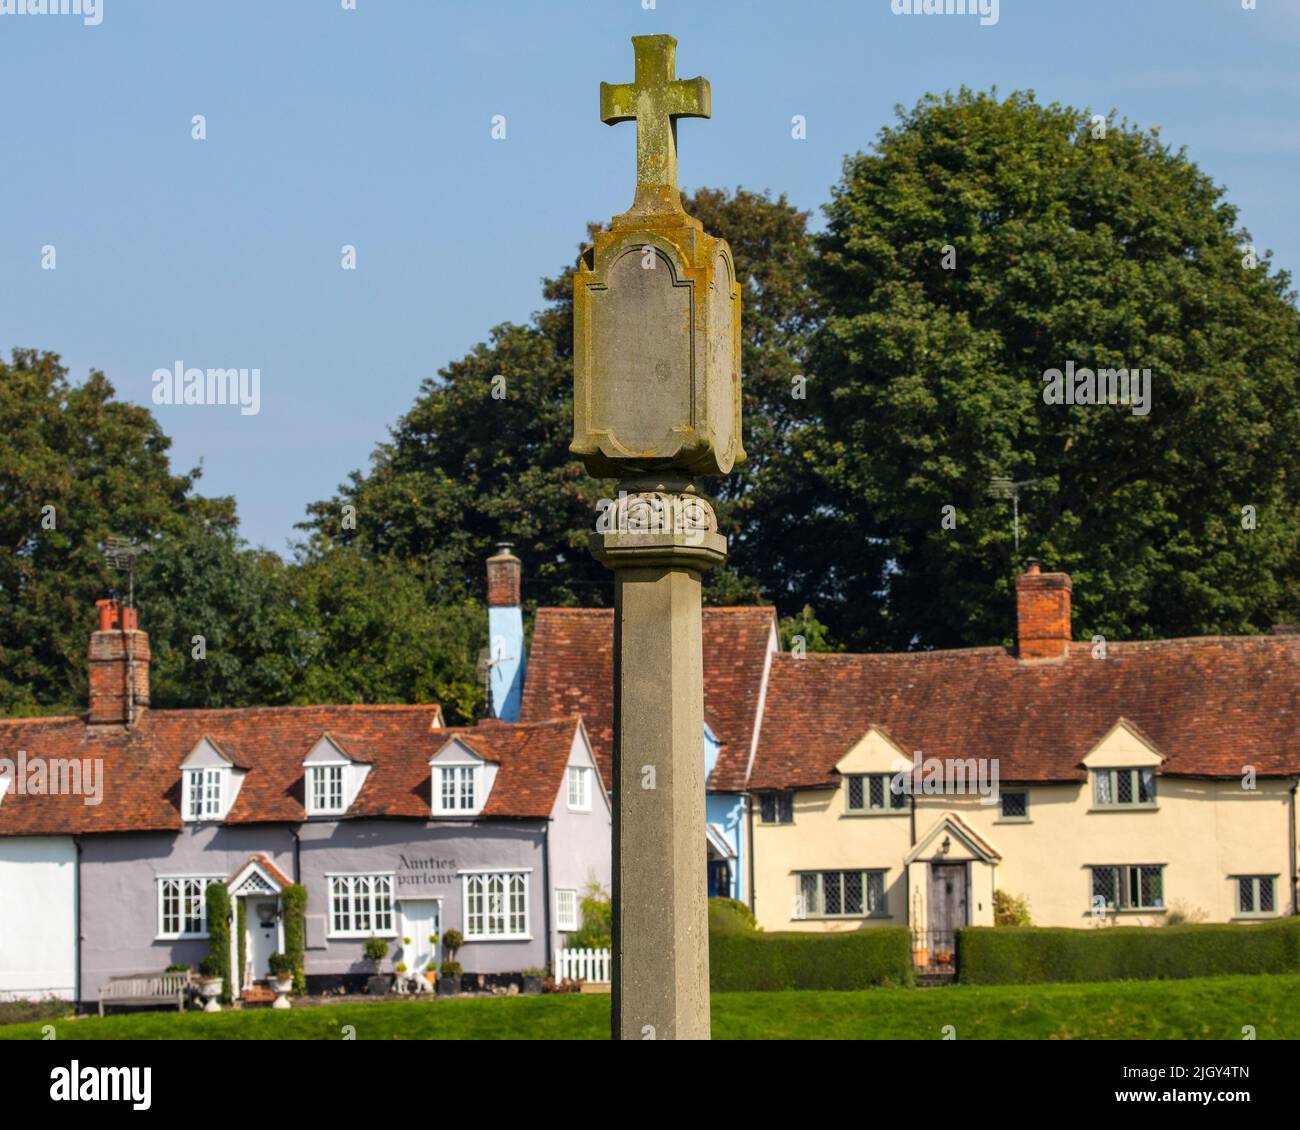 Essex, UK - September 6th 2021: Close-up of the cross on the War Memorial in the beautiful village of Finchingfield in Essex, UK.  It is dedicated to Stock Photo